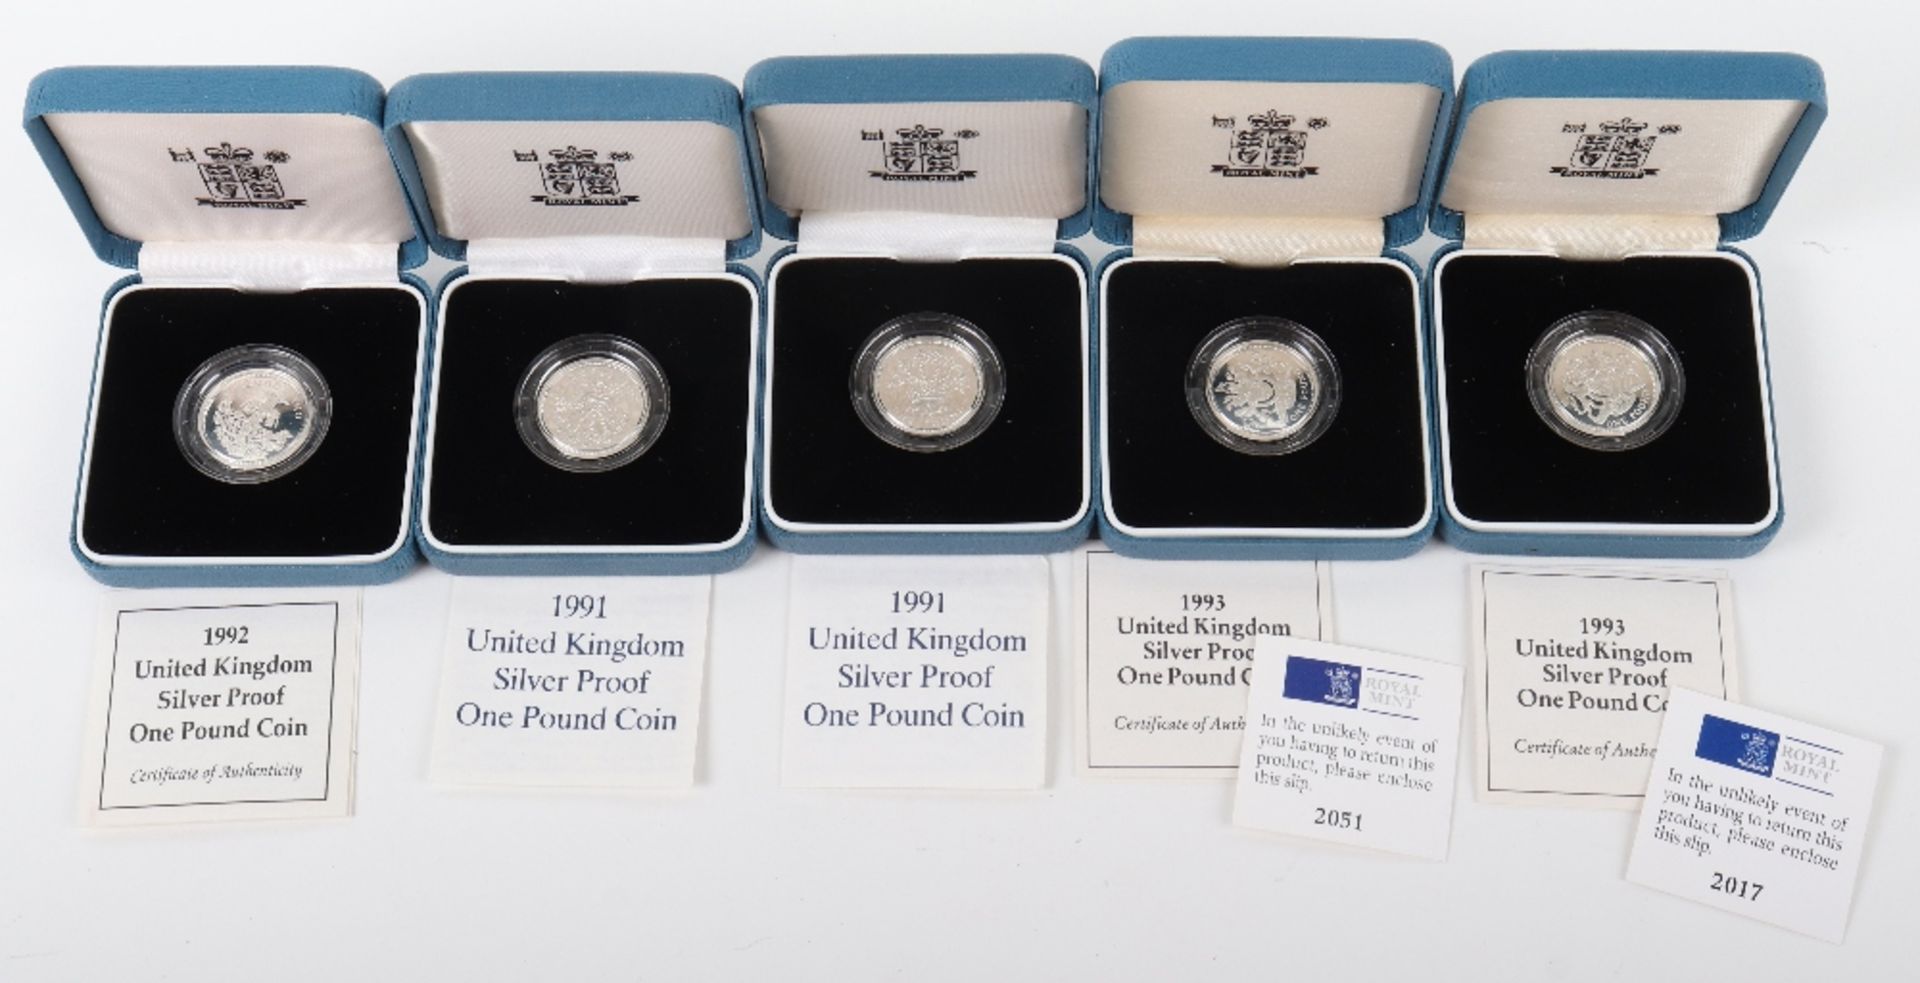 Five UK Silver Proof £1 (one pound) coins